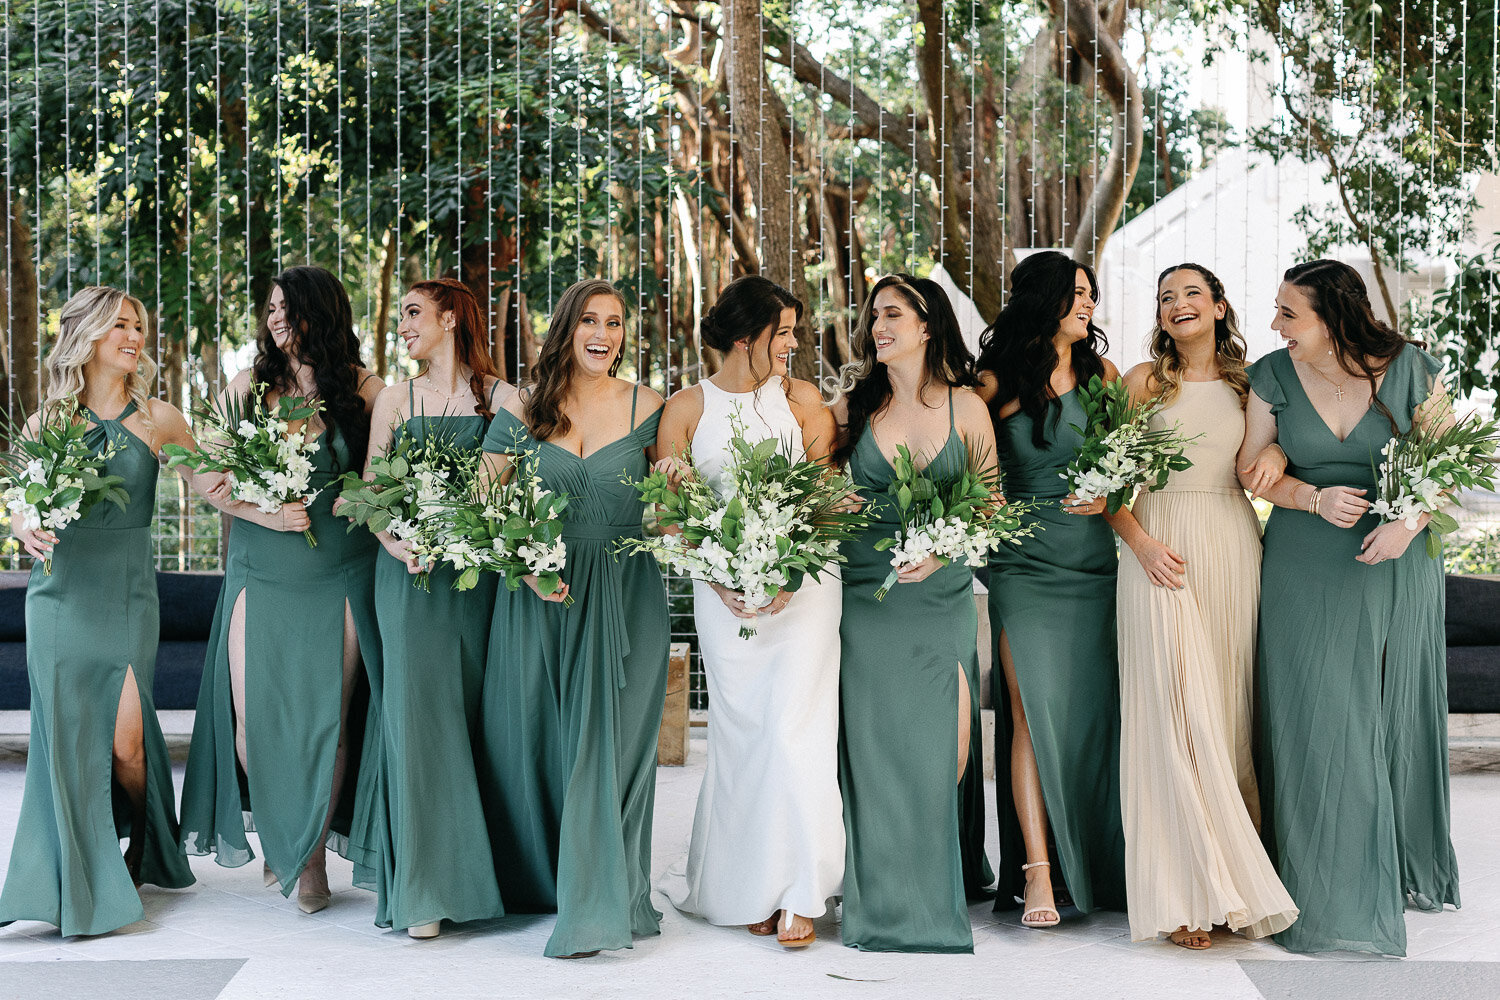 Bridesmaids walking together with bride wearing sage green dresses